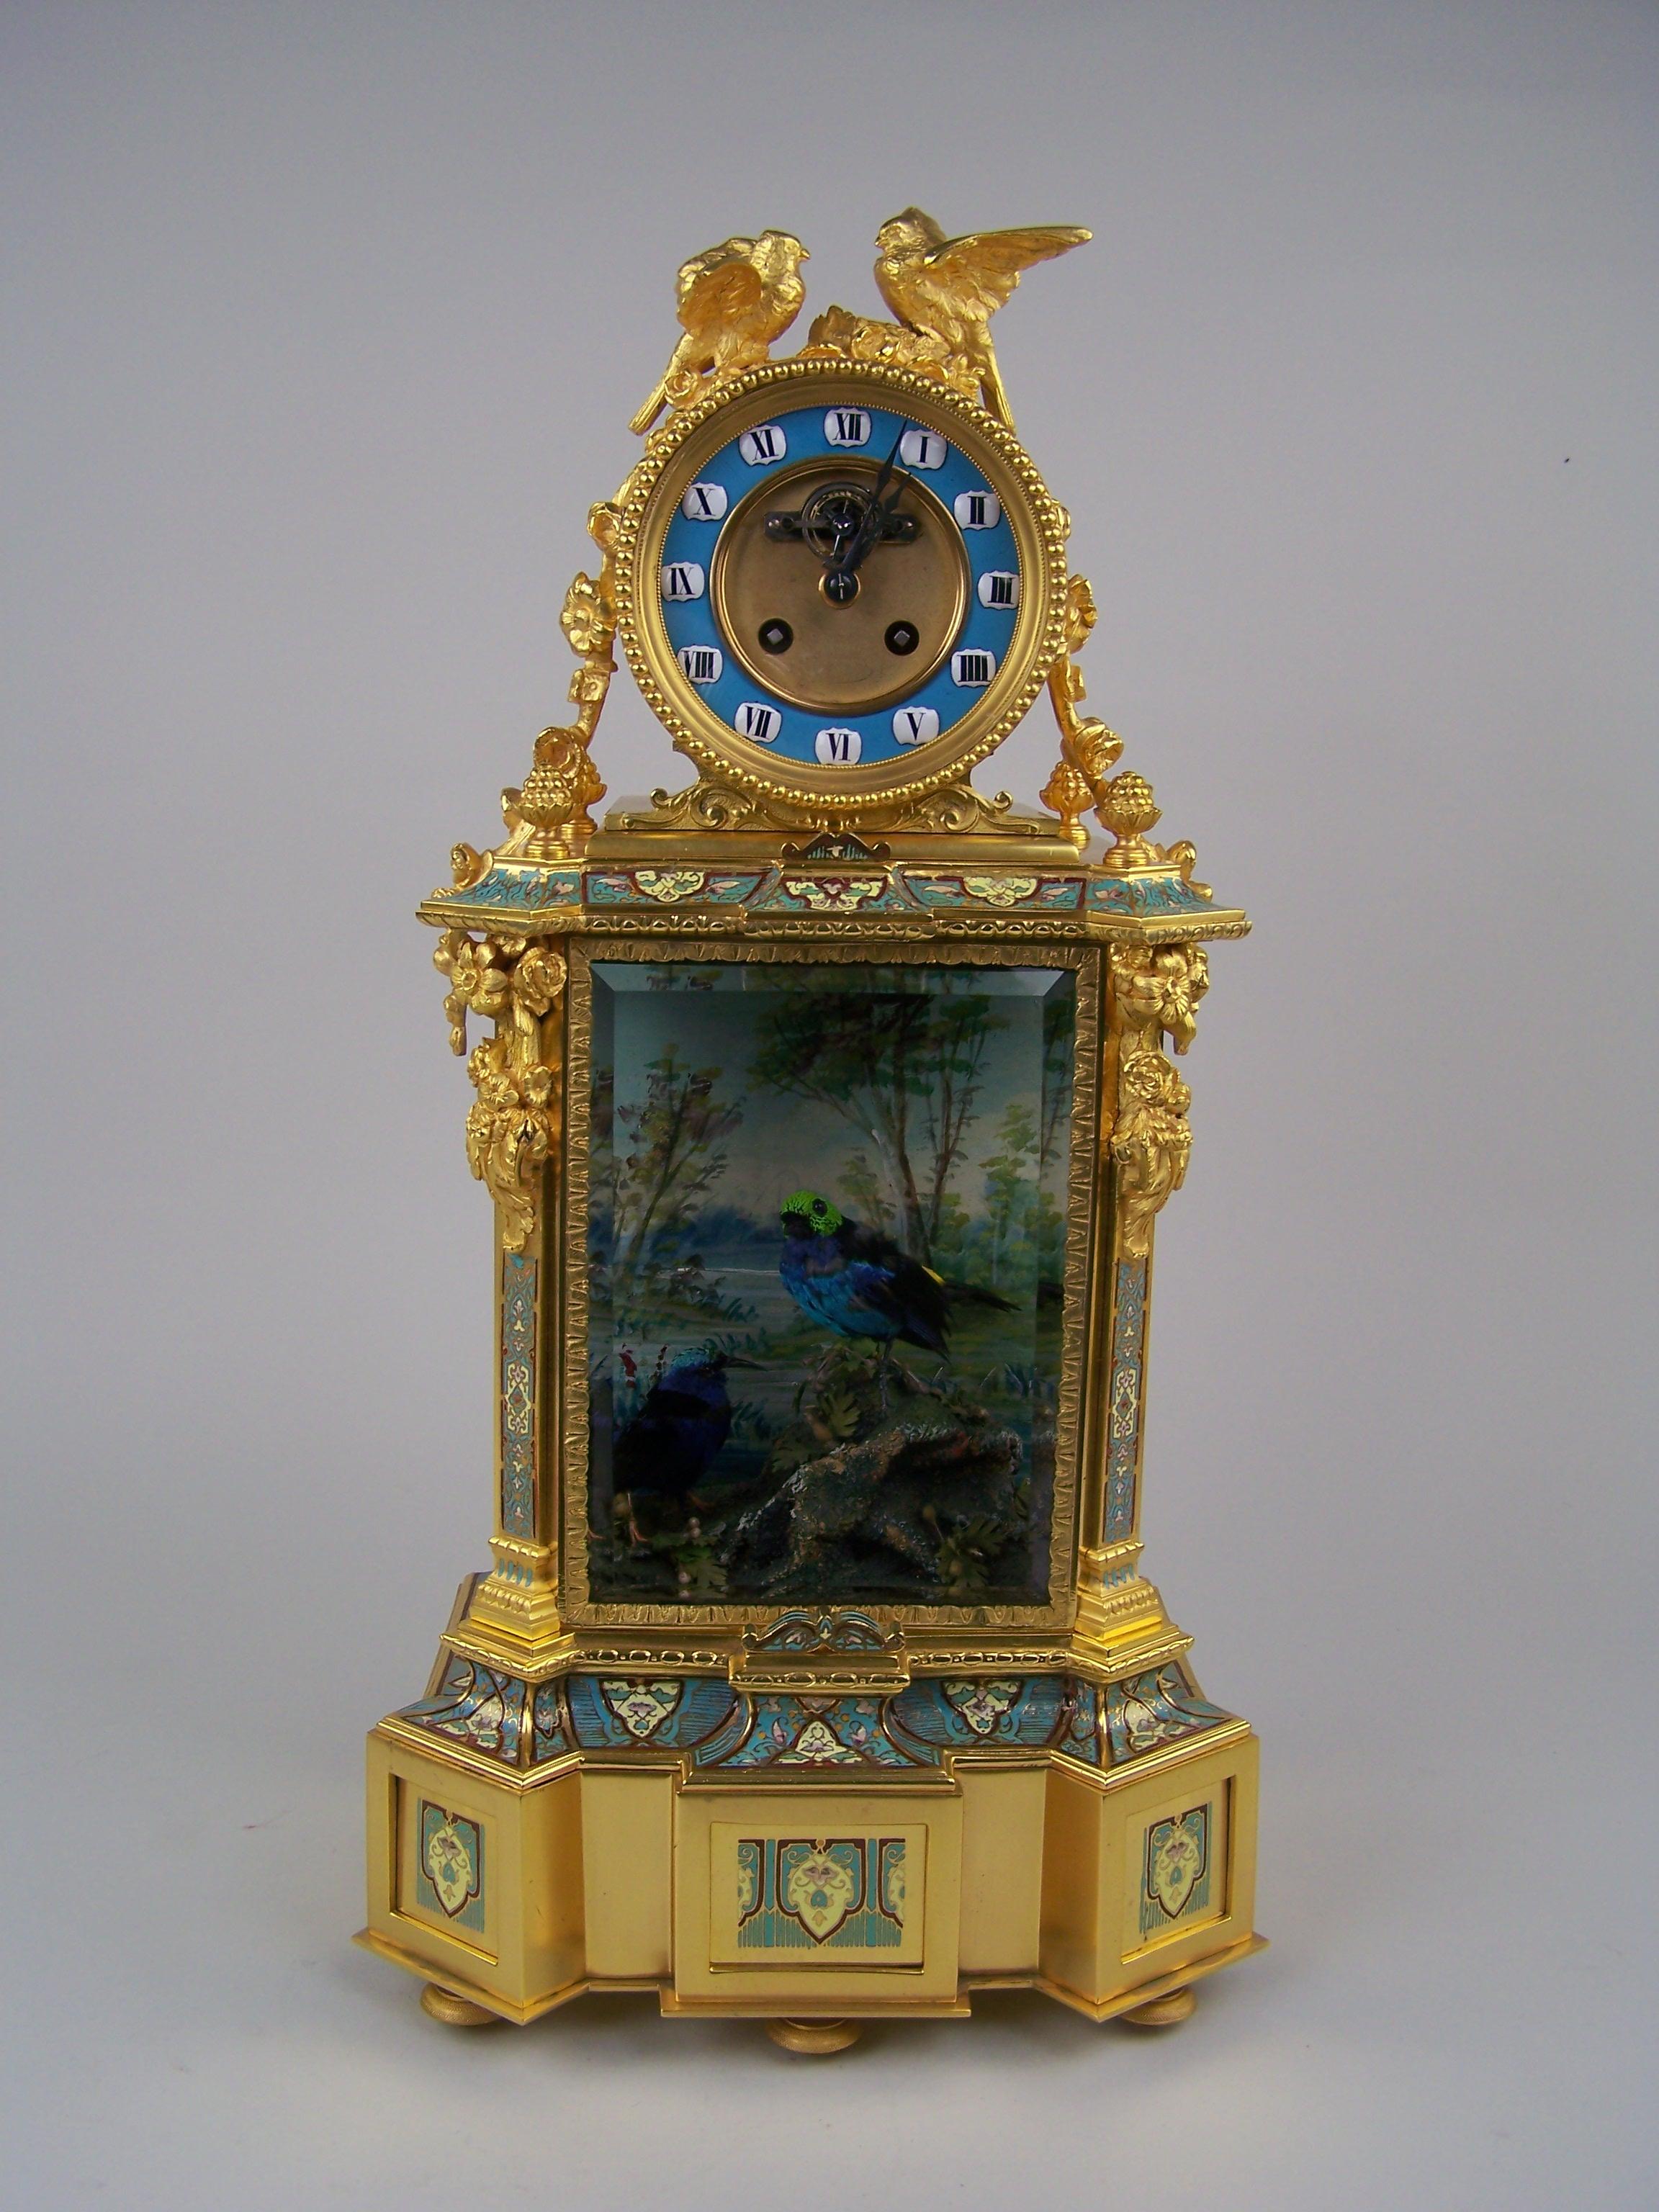 Late Victorian Clock with Singing Bird Automaton and Musical Mechanism by Bontems